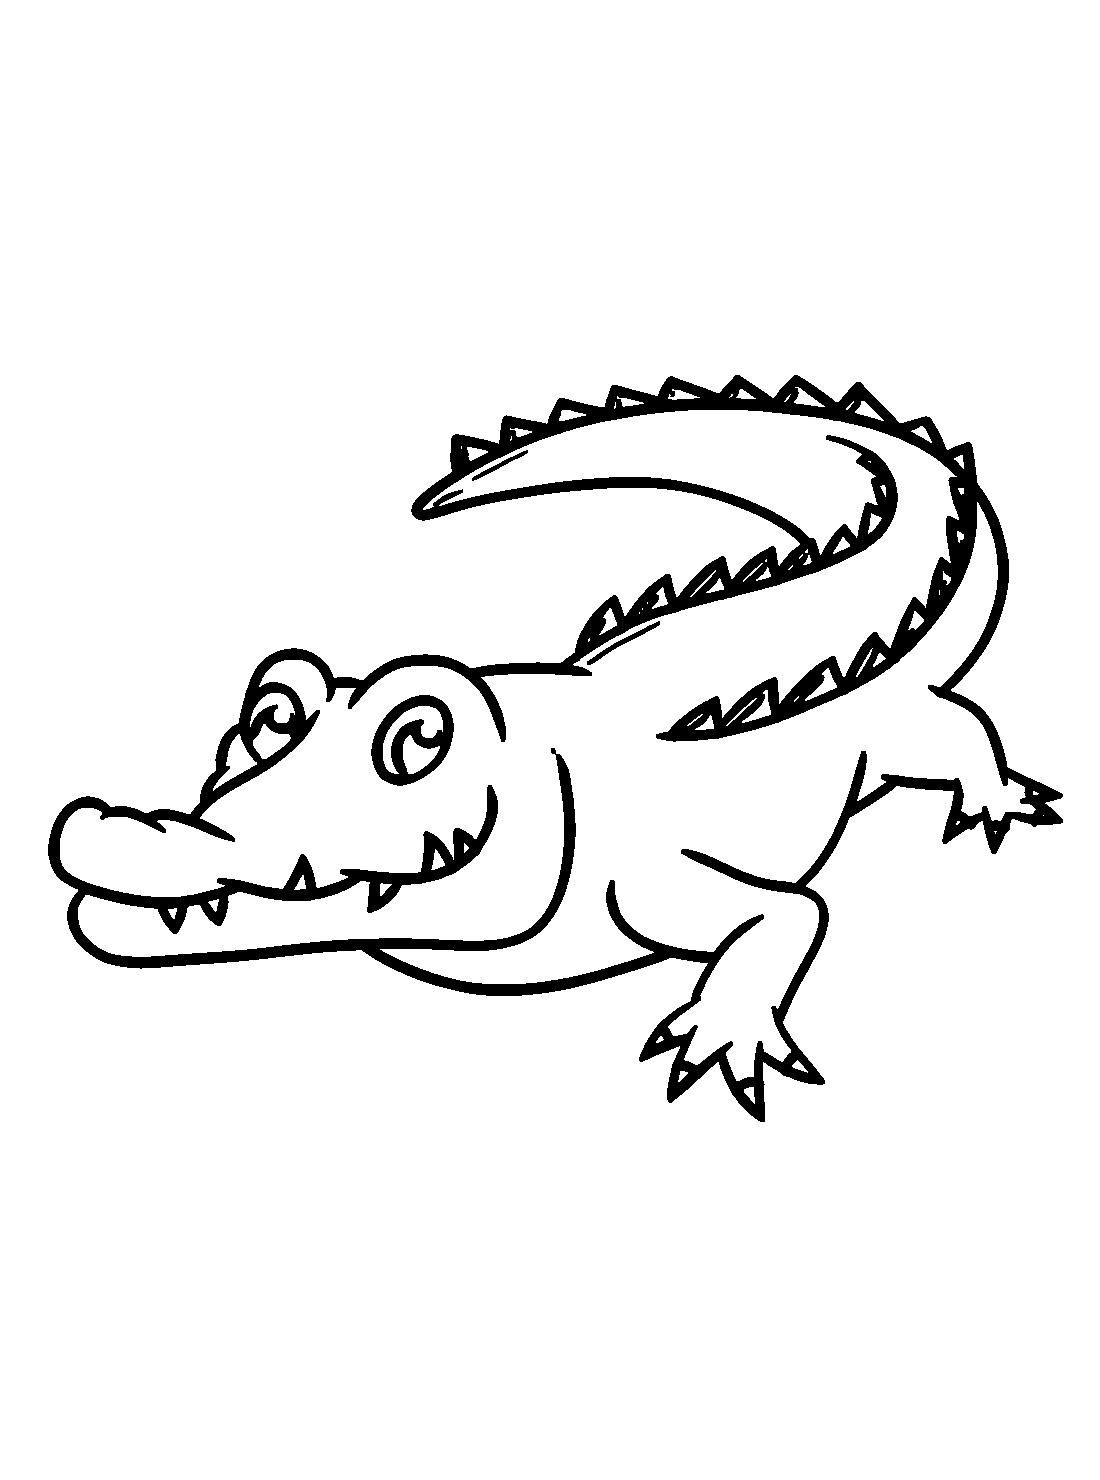 Alligators painting coloring pages